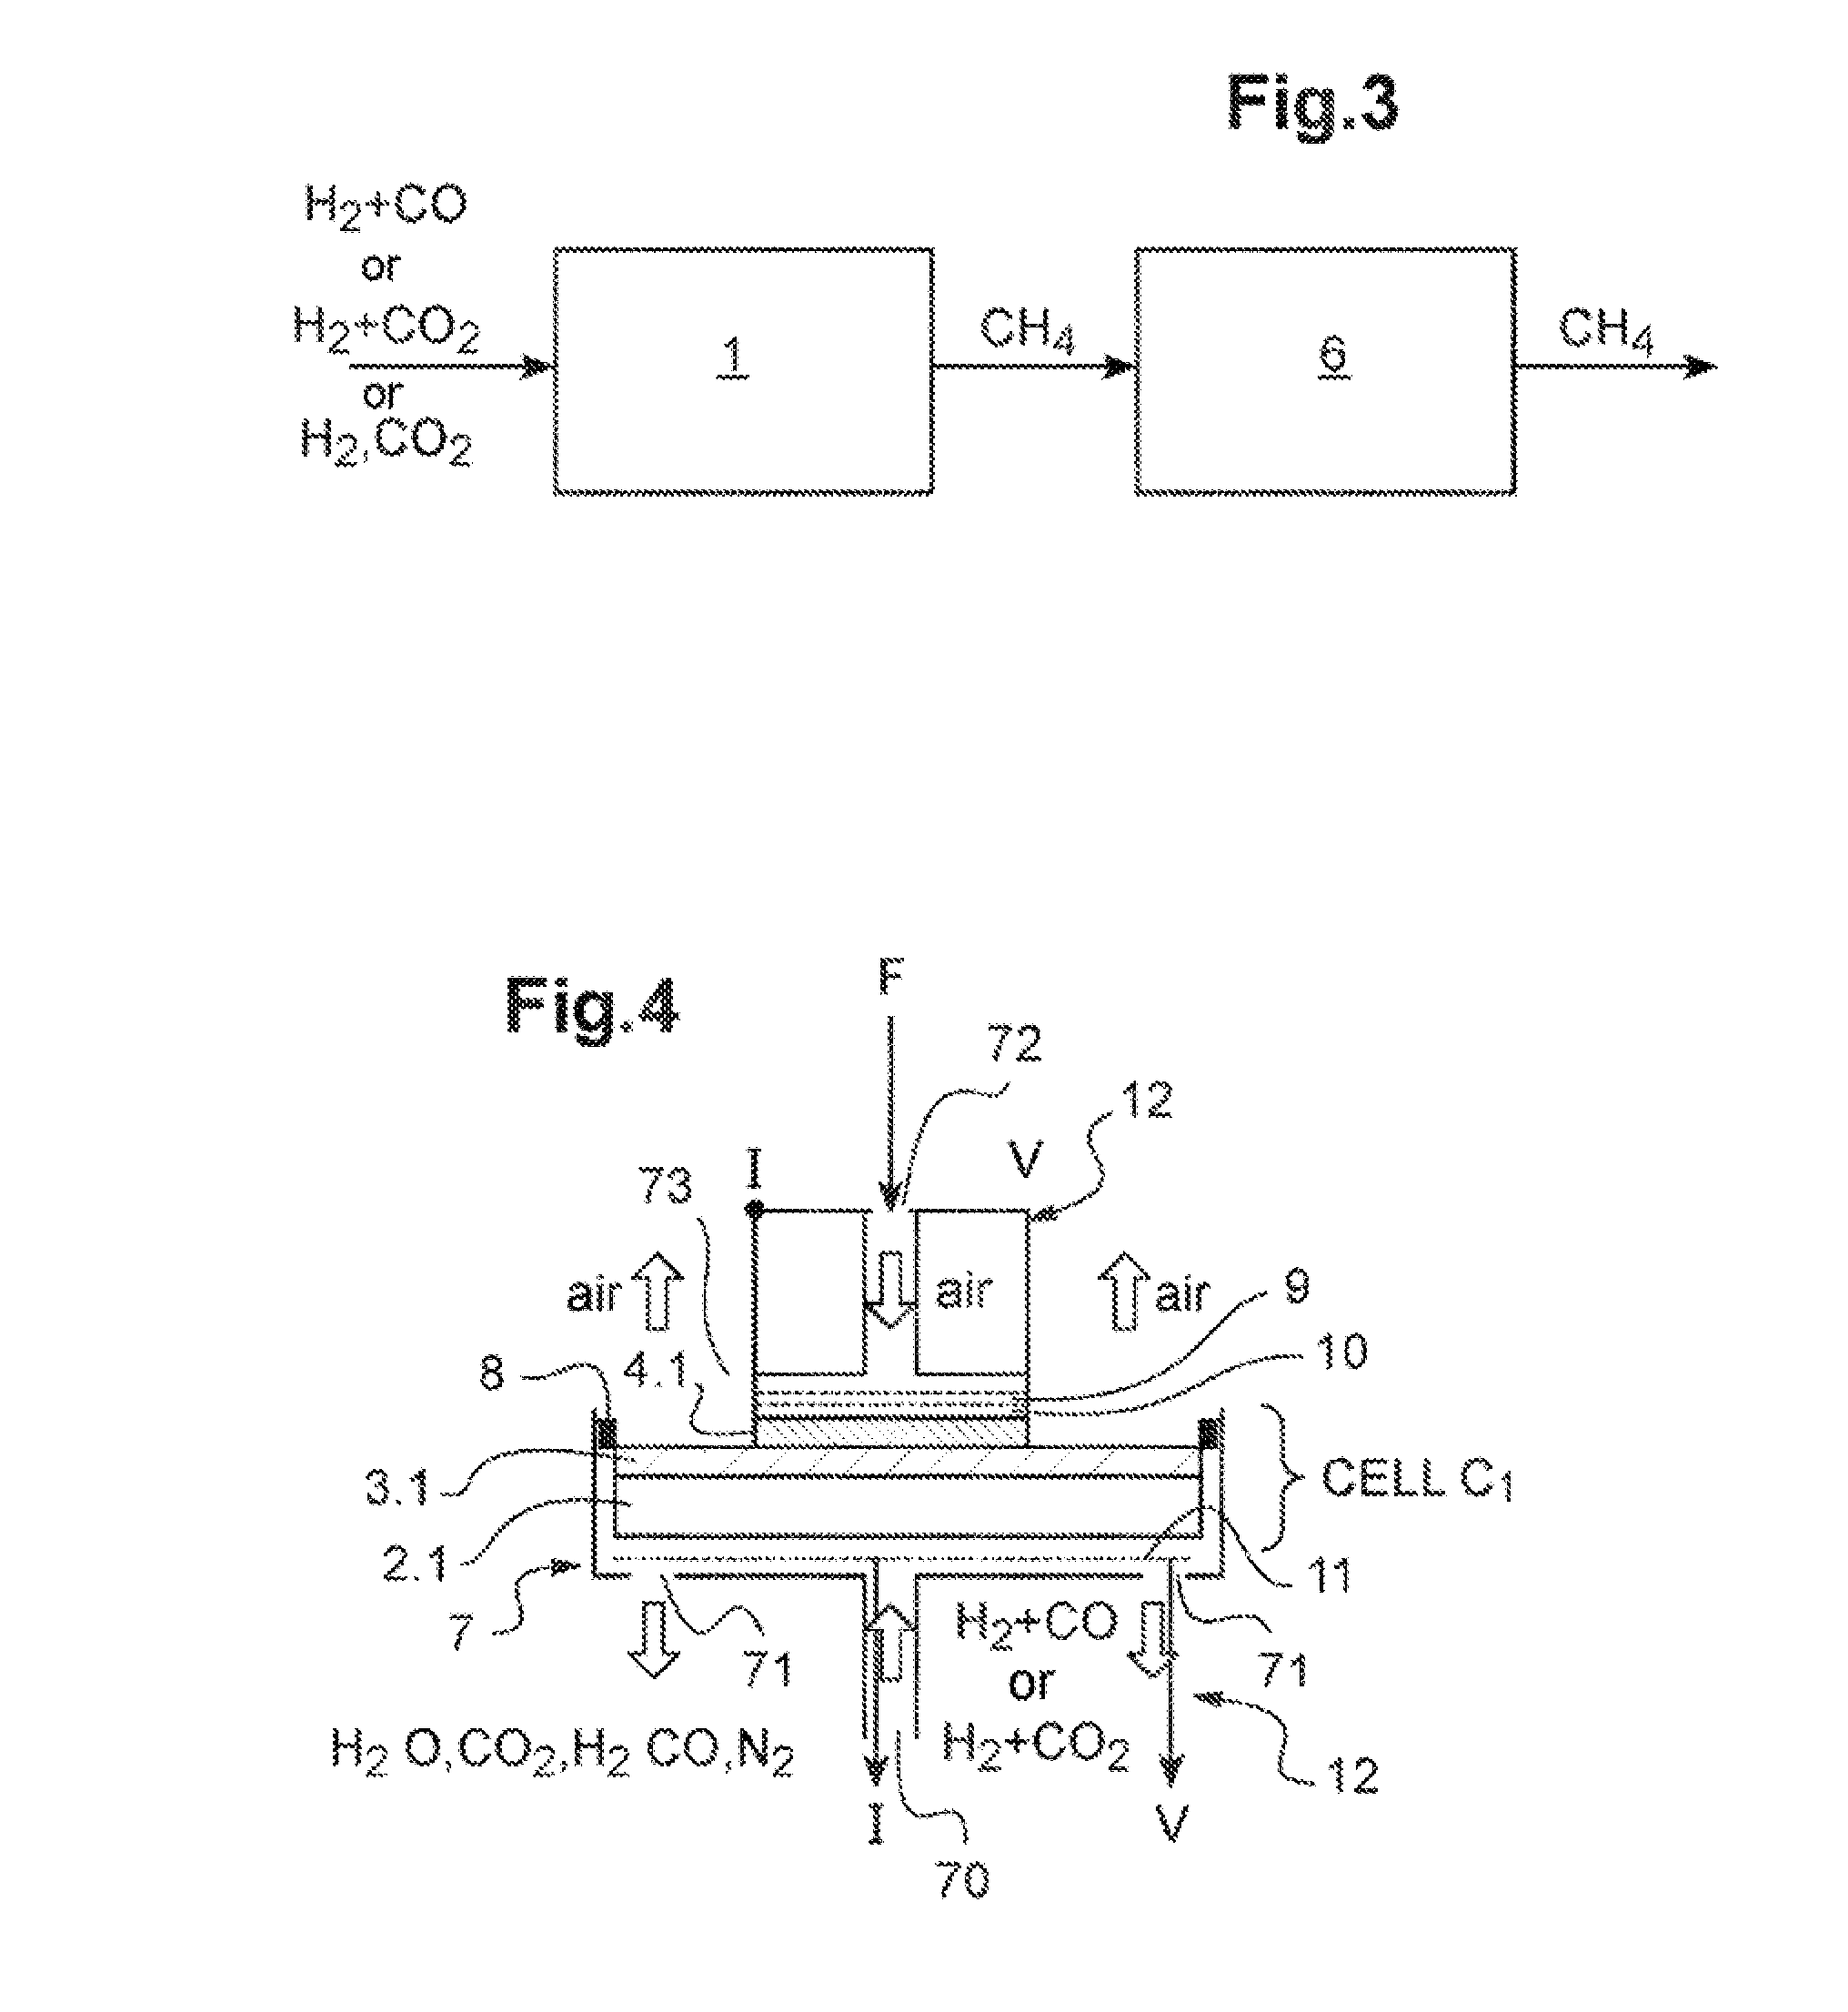 Method for operating an soec-type stack reactor for producing methane in the absence of available electricity